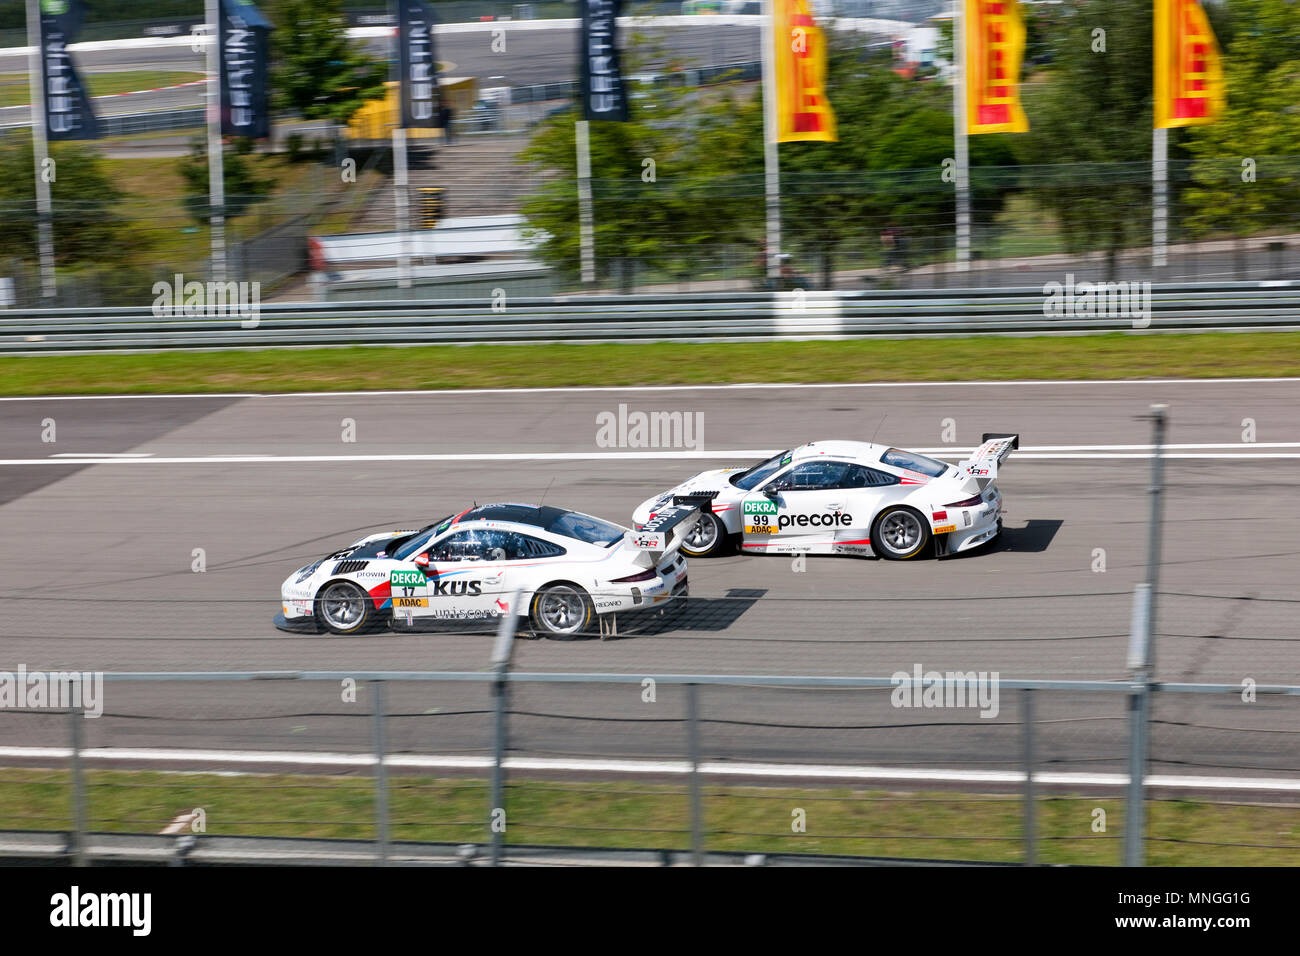 two Porsche GT3 fighting at Nuerburgring, racetrack, track, F1, DTM, GT Masters, Porsche Cup, Formula, racing, green hell, Nuerburgring, Rheinland-Pfa Stock Photo